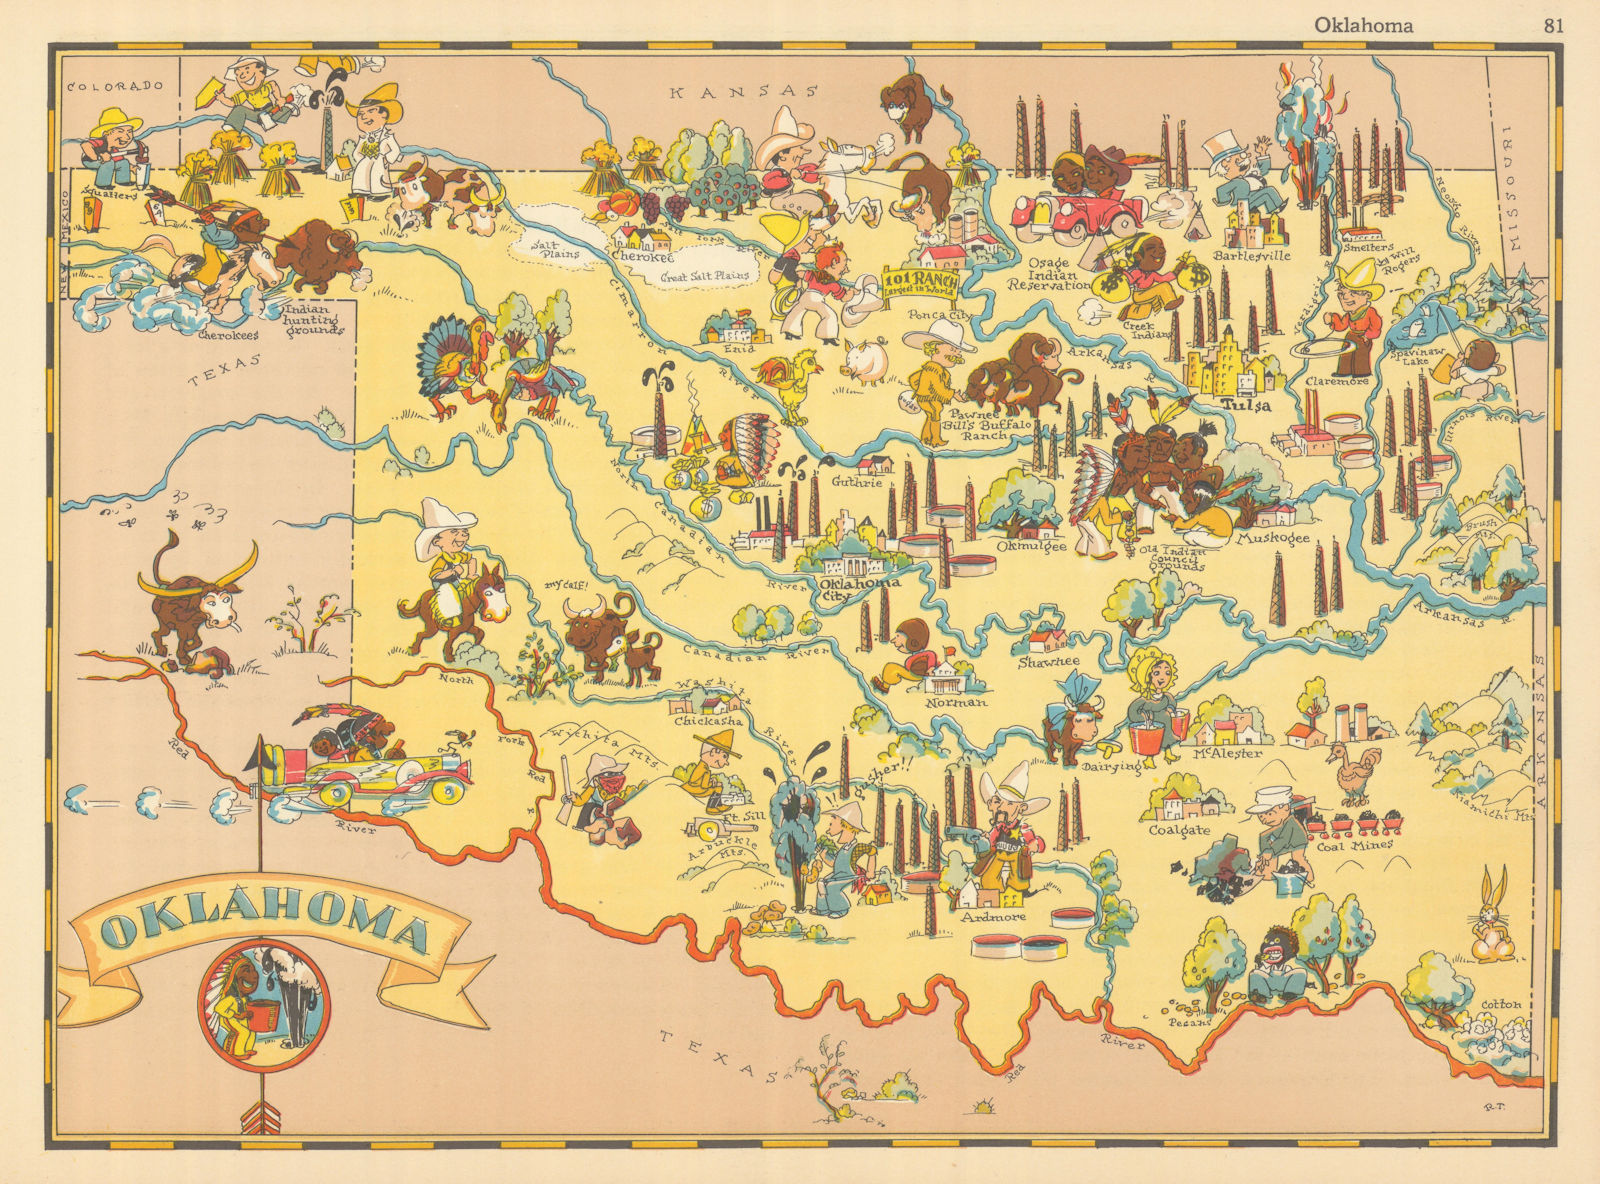 Oklahoma. Pictorial state map by Ruth Taylor White 1935 old vintage chart